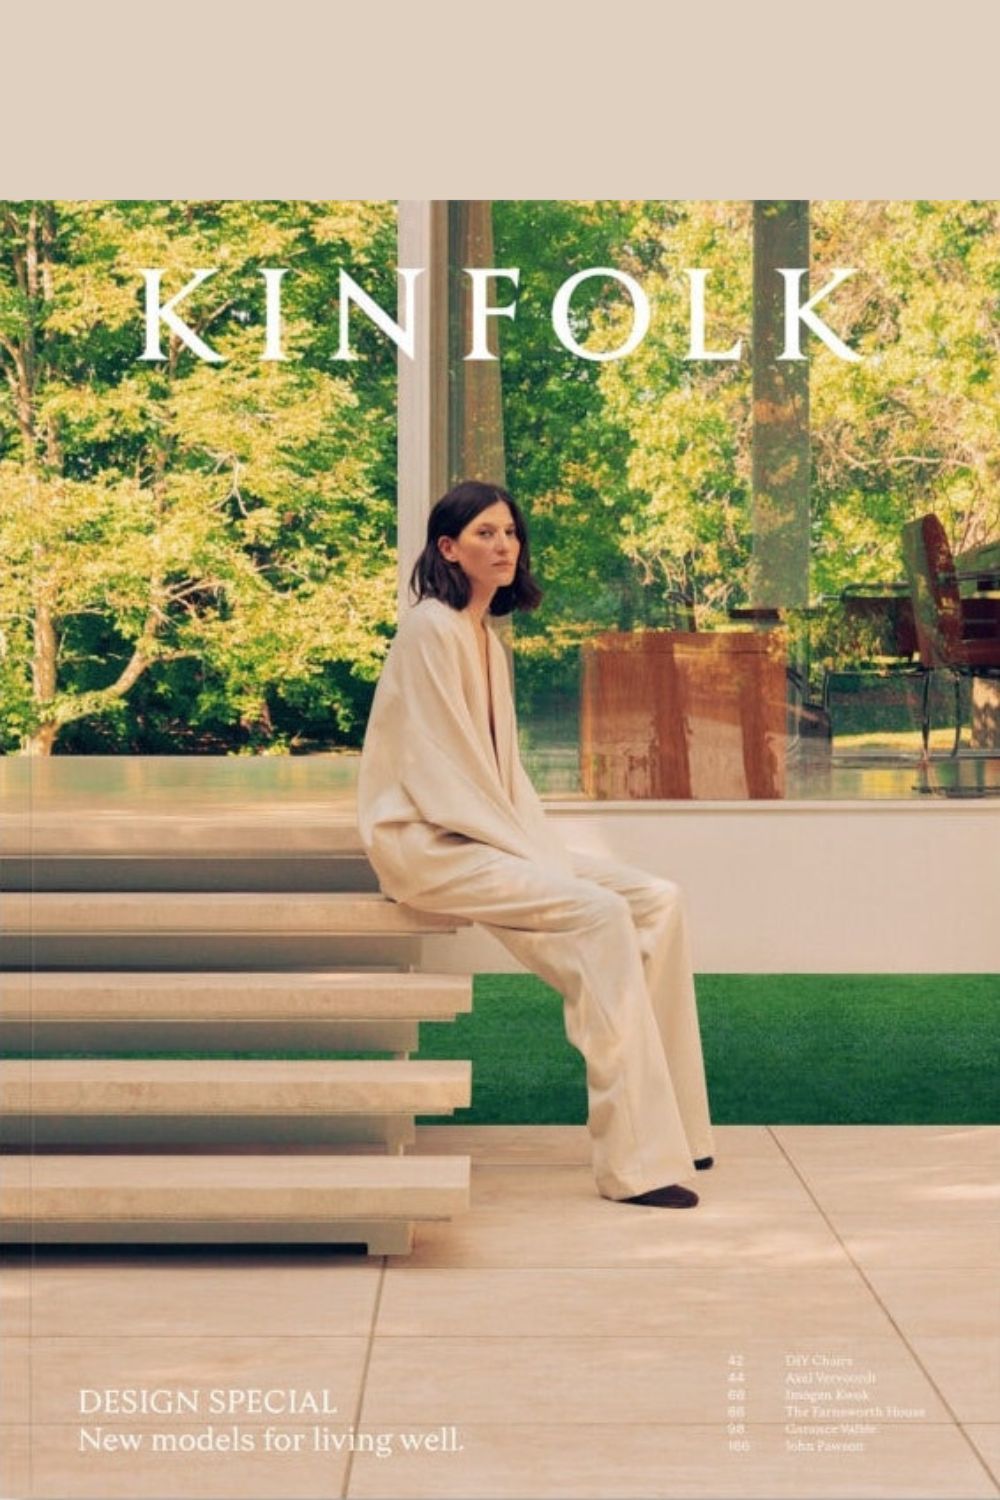 Kinfolk cover issue 51 with woman sitting on elegant stone steps